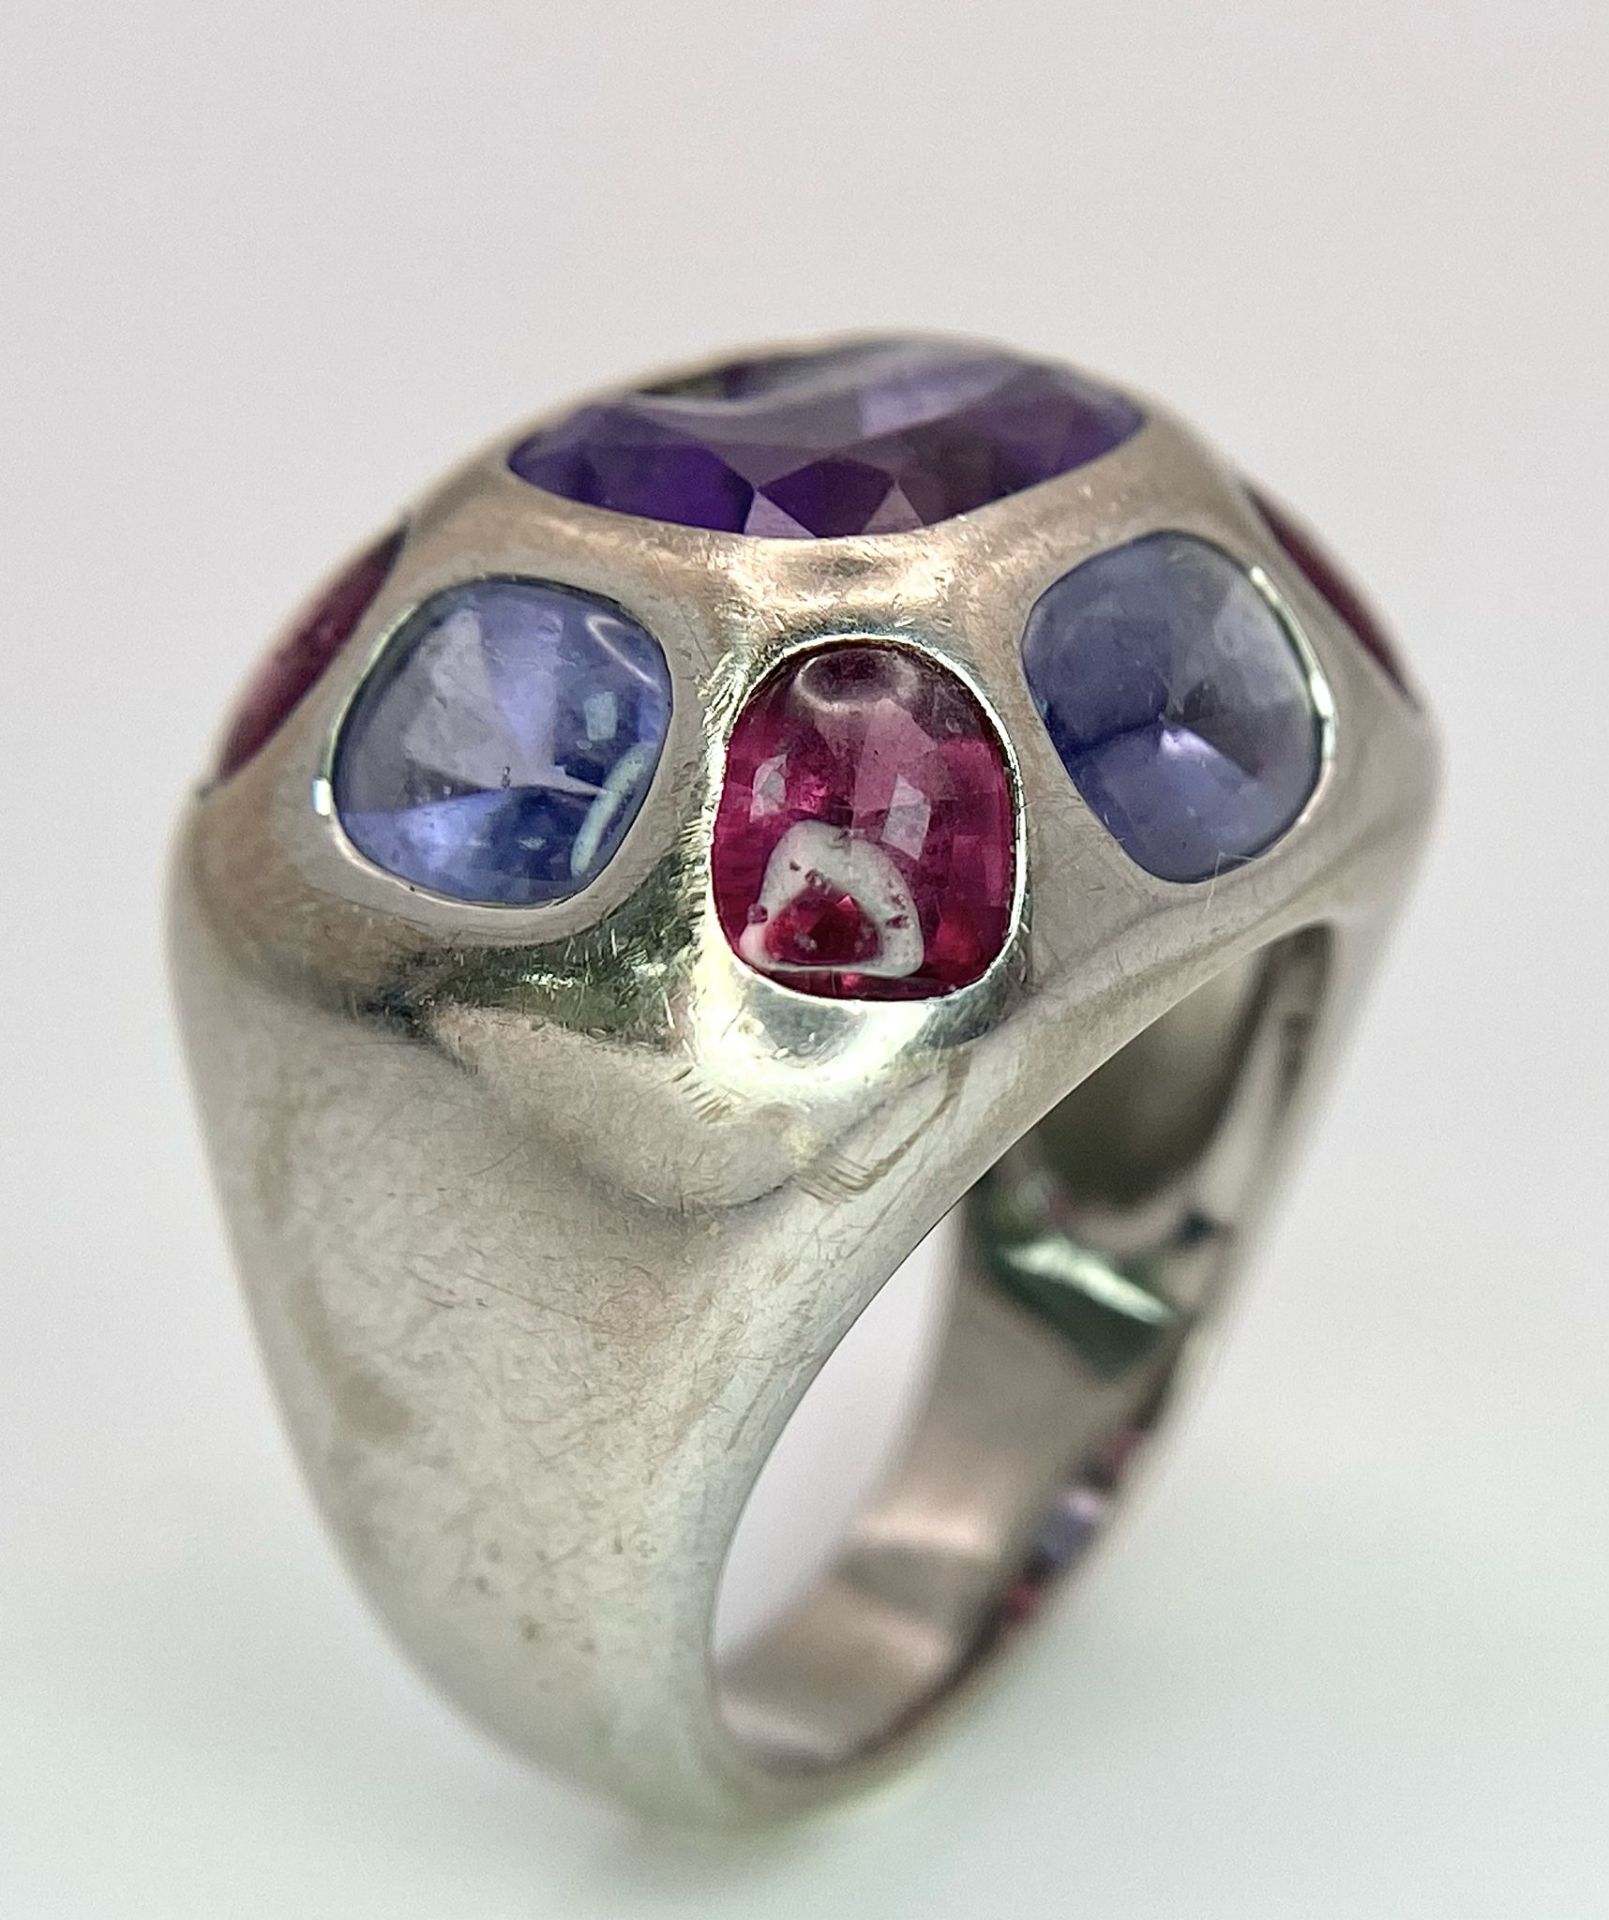 A Chanel Designer 18K White Gold and Amethyst and Garnet Ring. Rectangular cut central amethyst with - Image 7 of 13